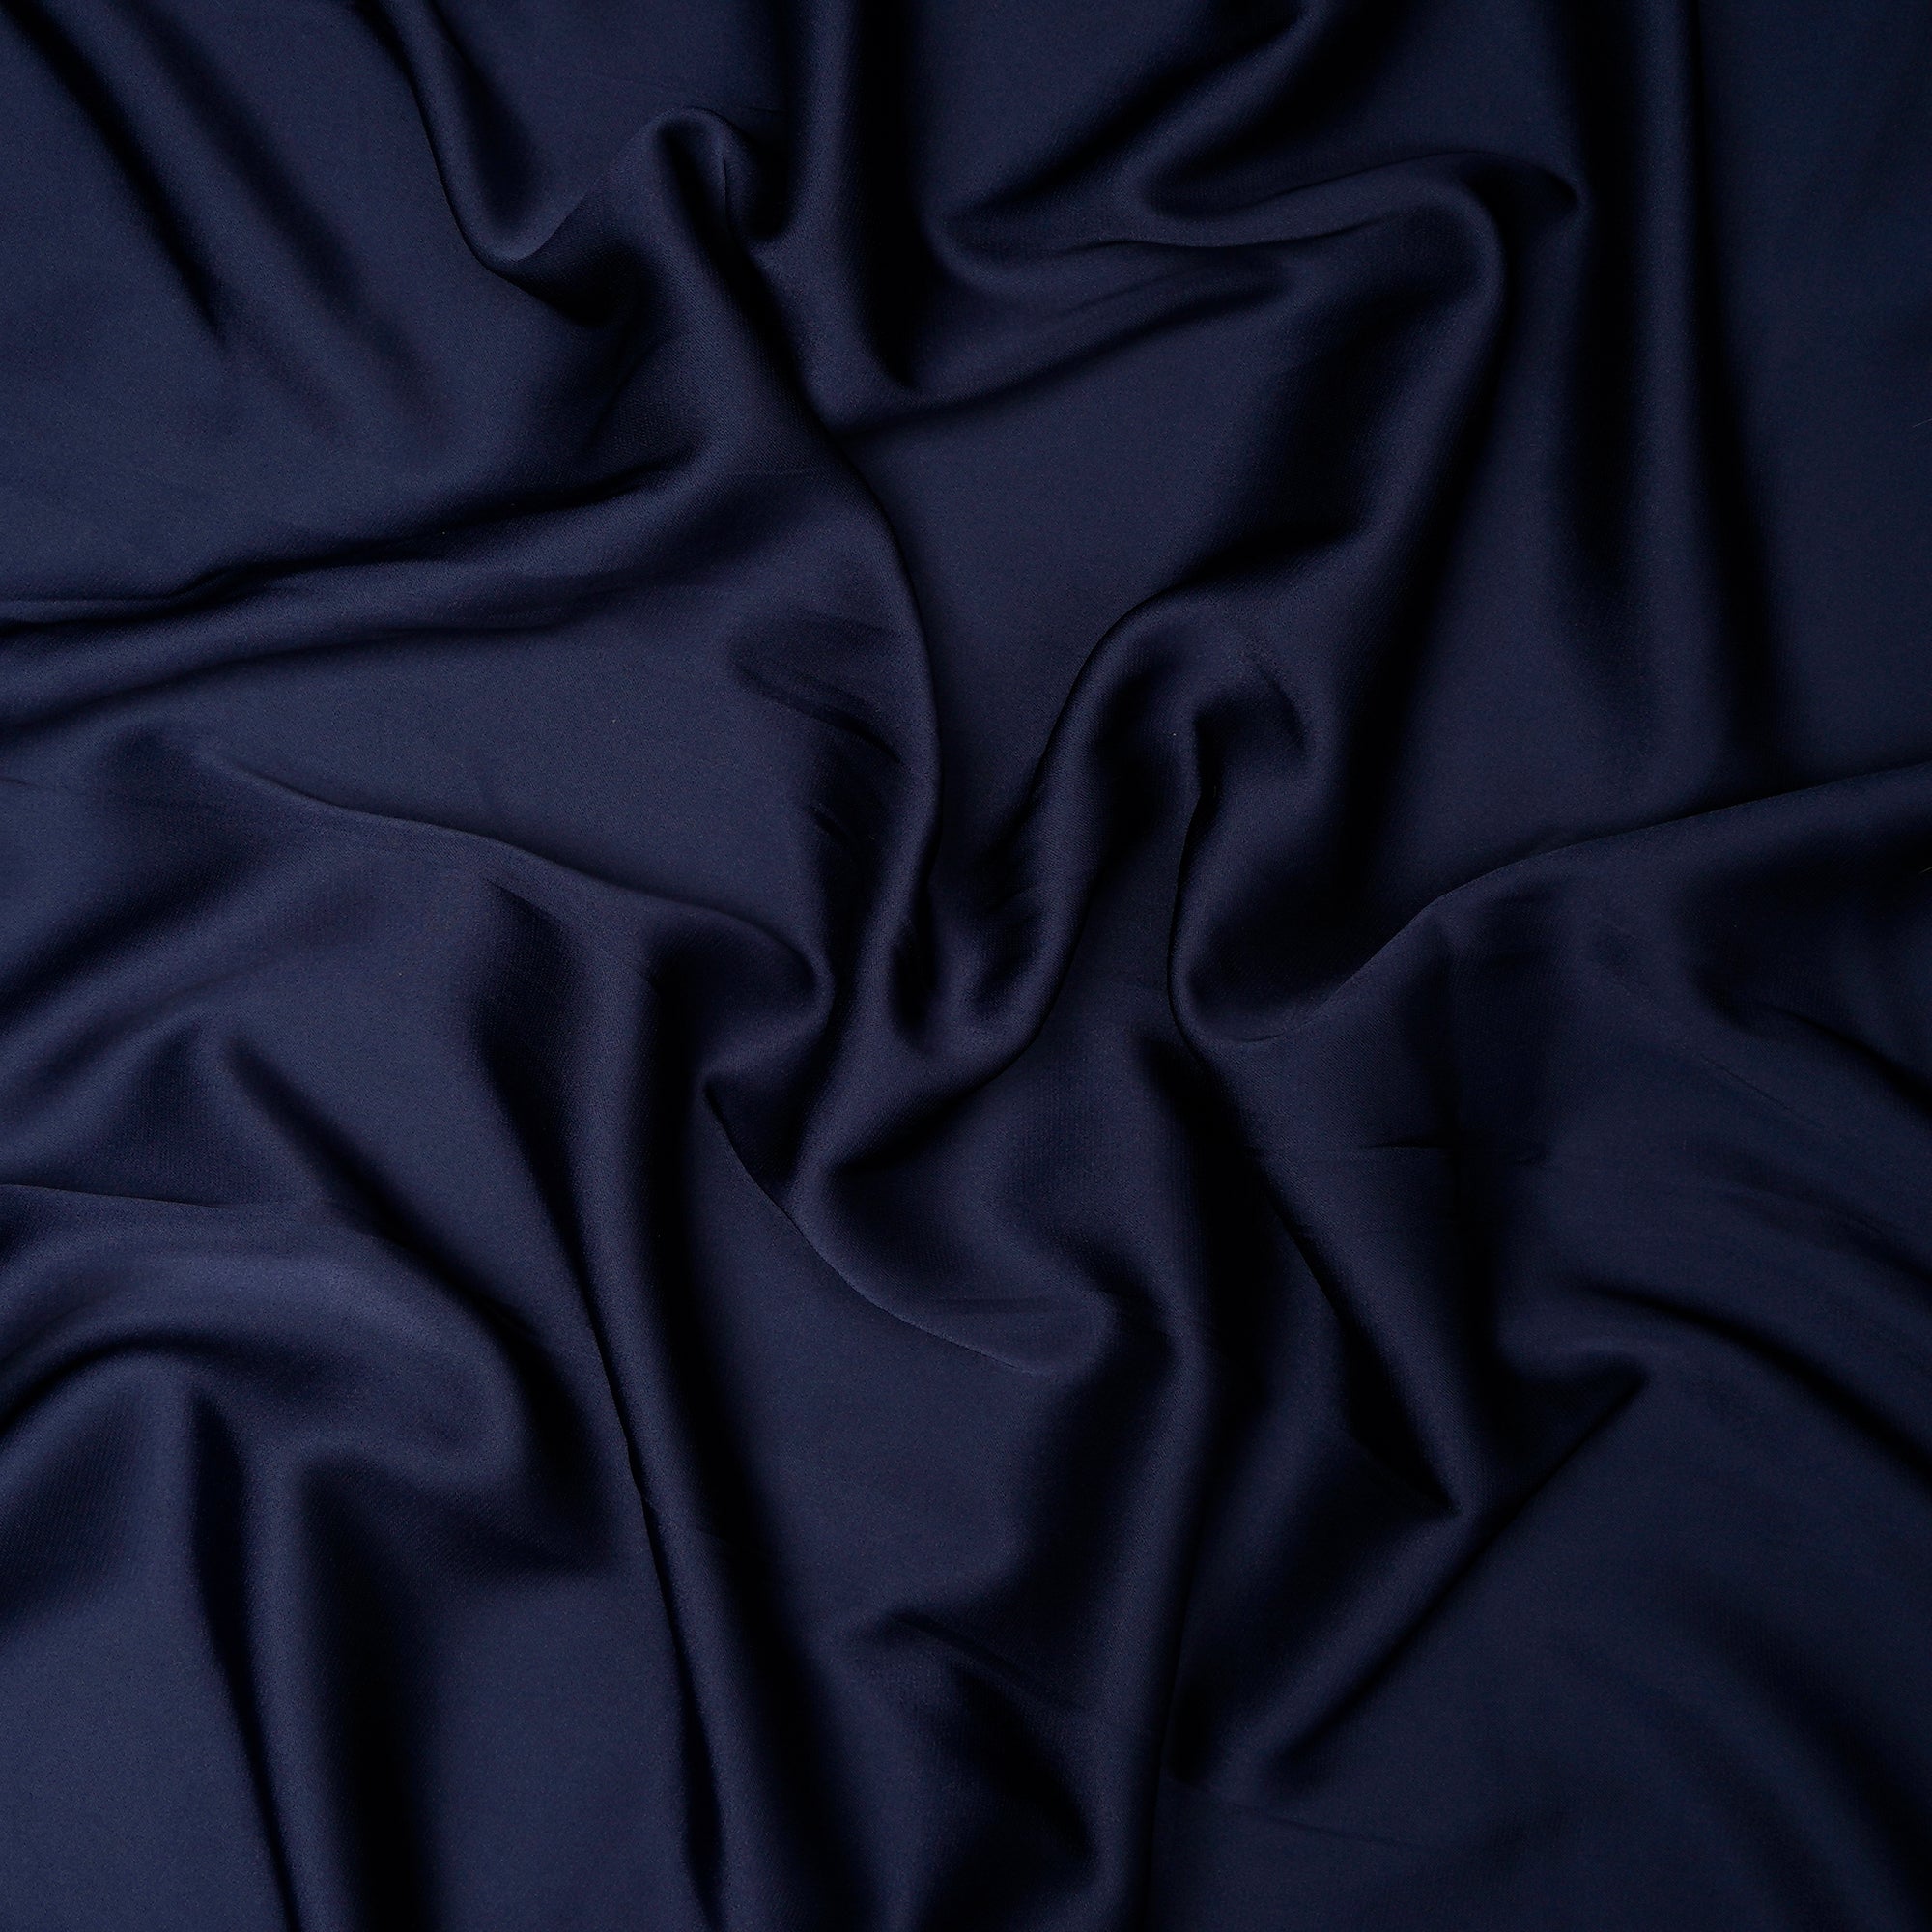 Navy Blue Solid Dyed Imported Armani Satin Fabric (60" Width)